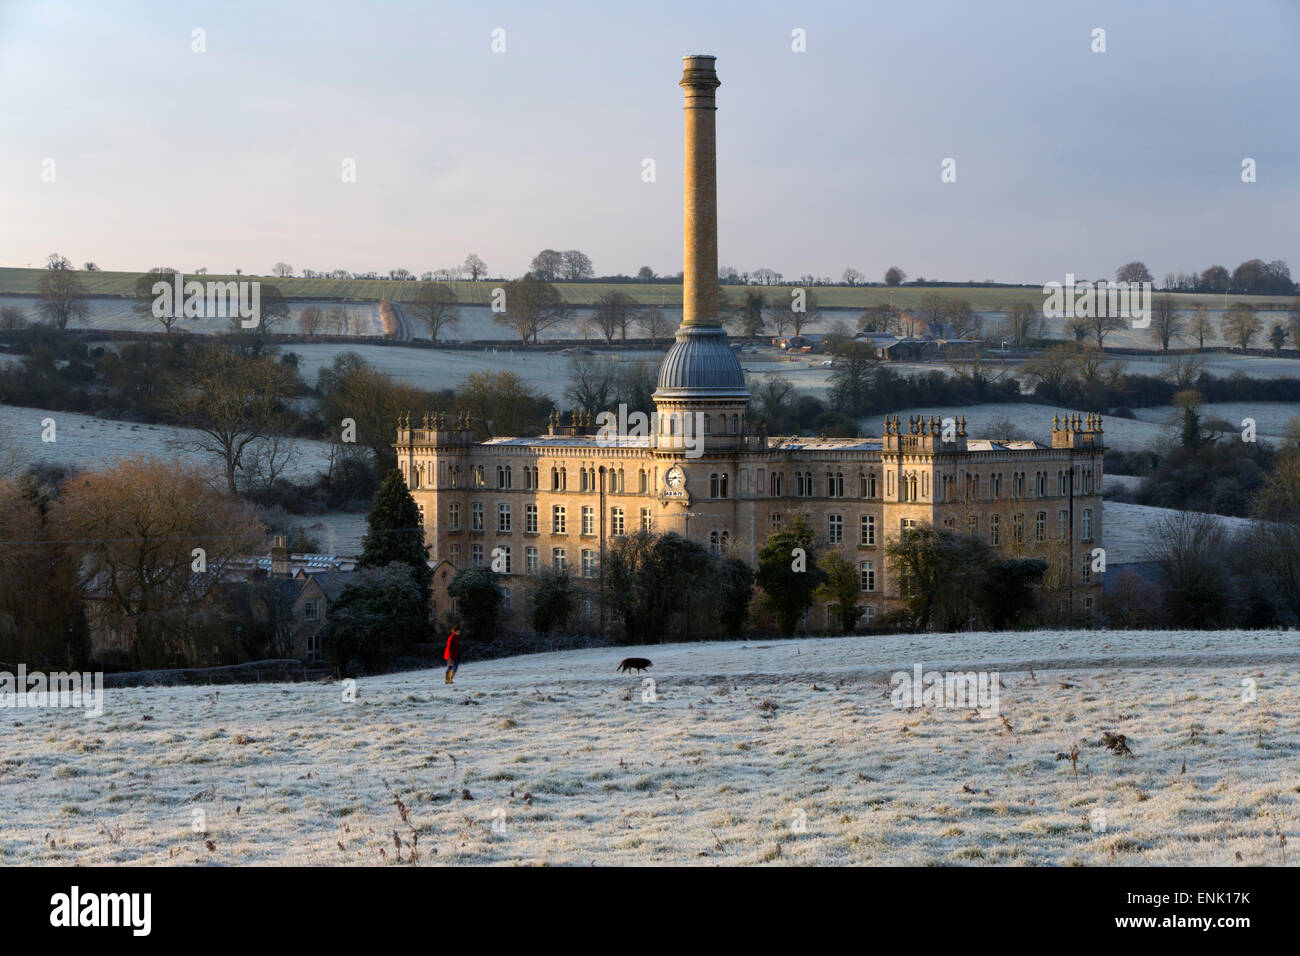 Bliss Mill de matin givre, Cotswolds, Chipping Norton, Oxfordshire, Angleterre, Royaume-Uni, Europe Banque D'Images